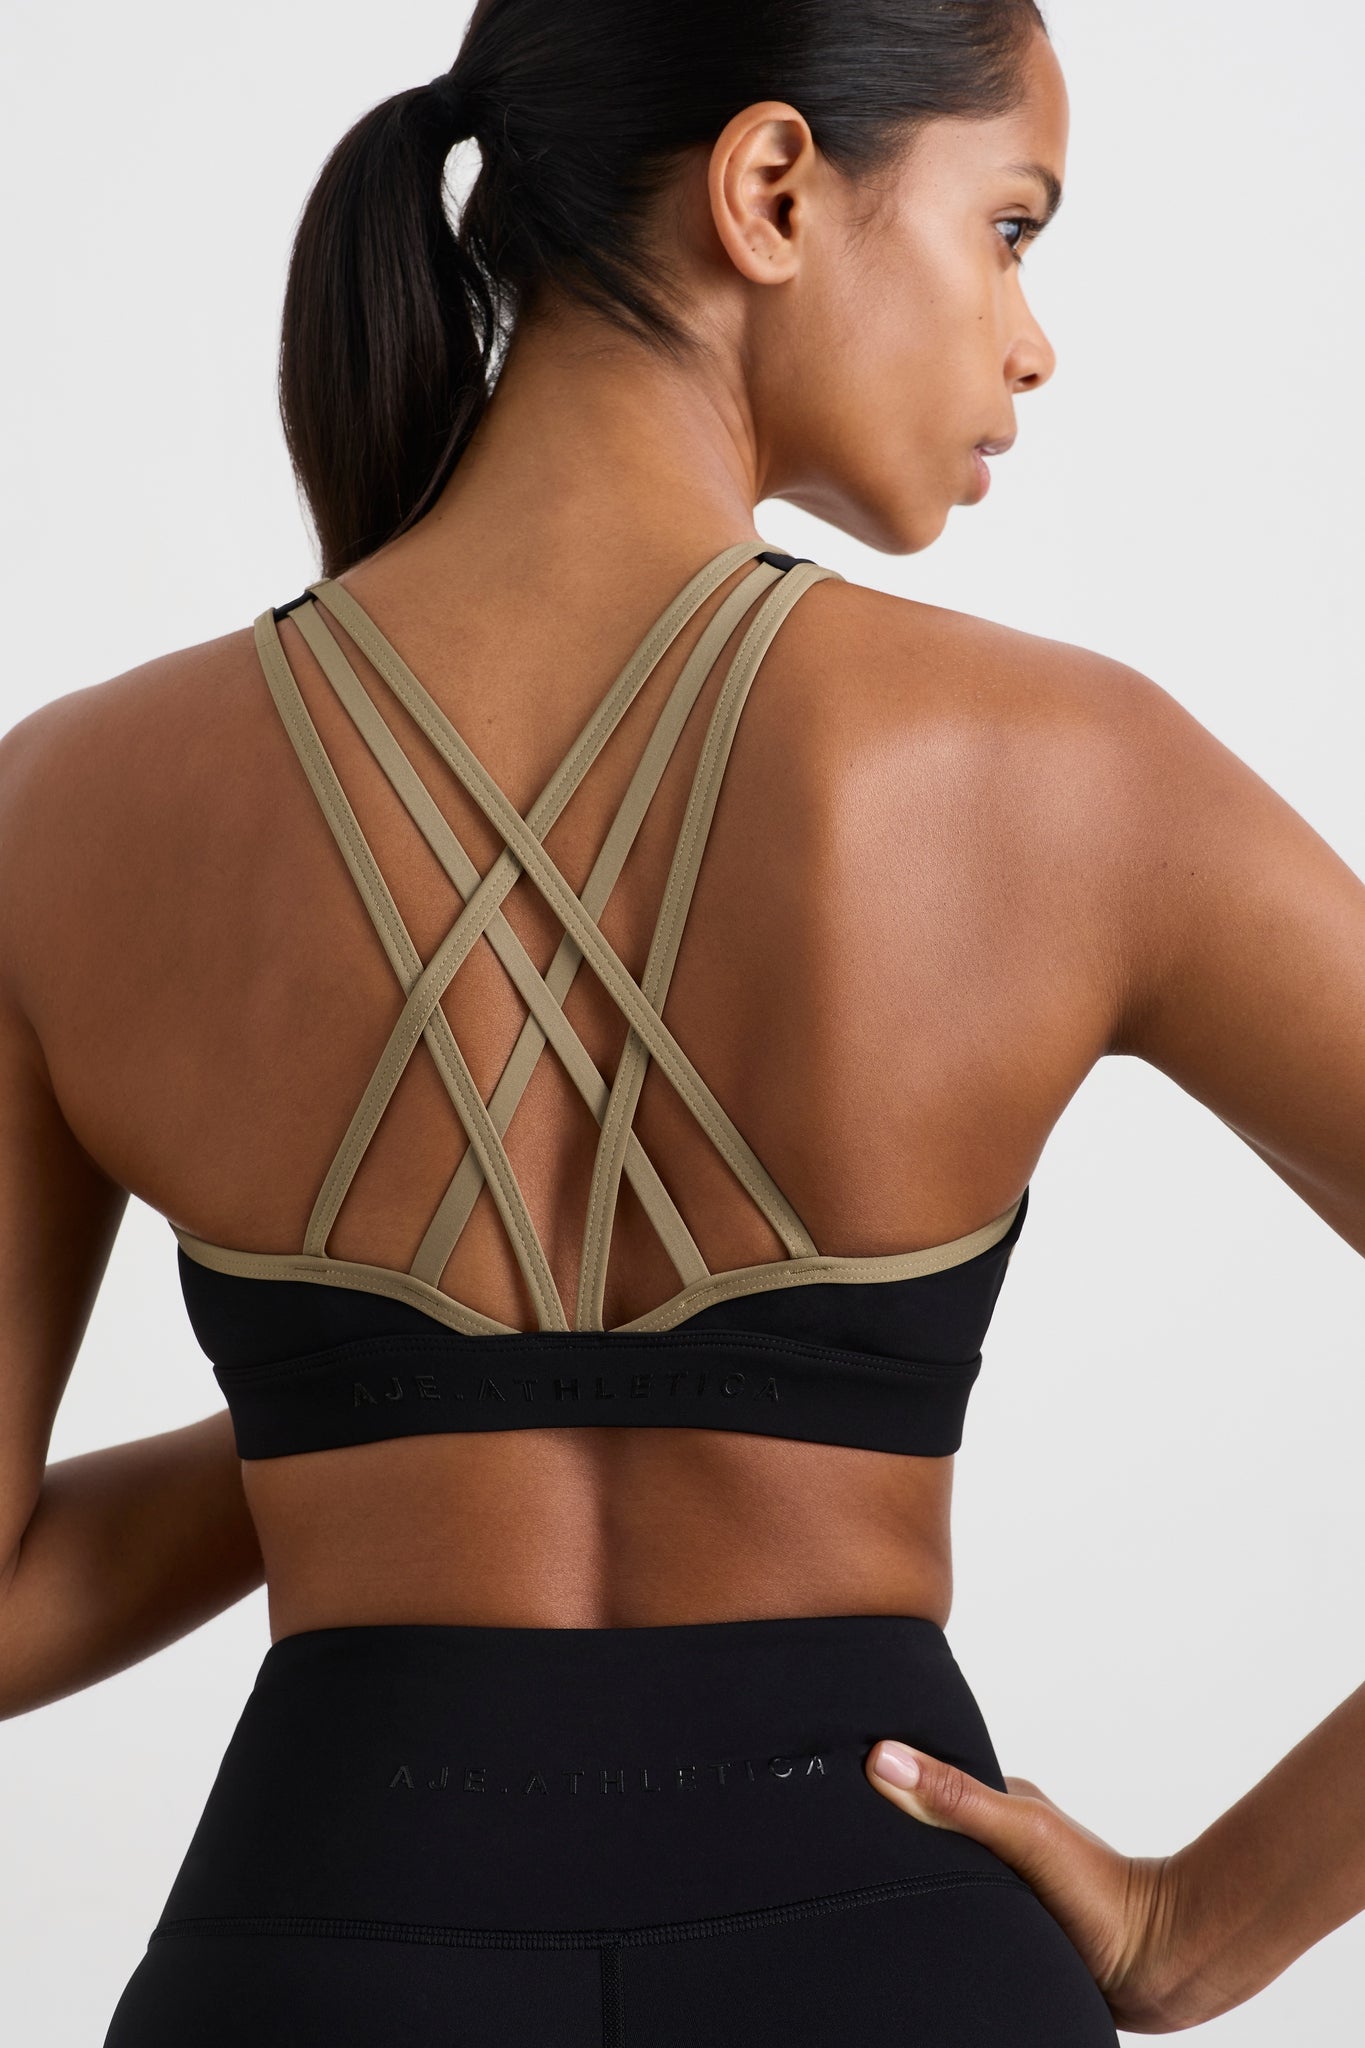 Strappy Lattice Back Workout Tank Top with Built In Sports Bra